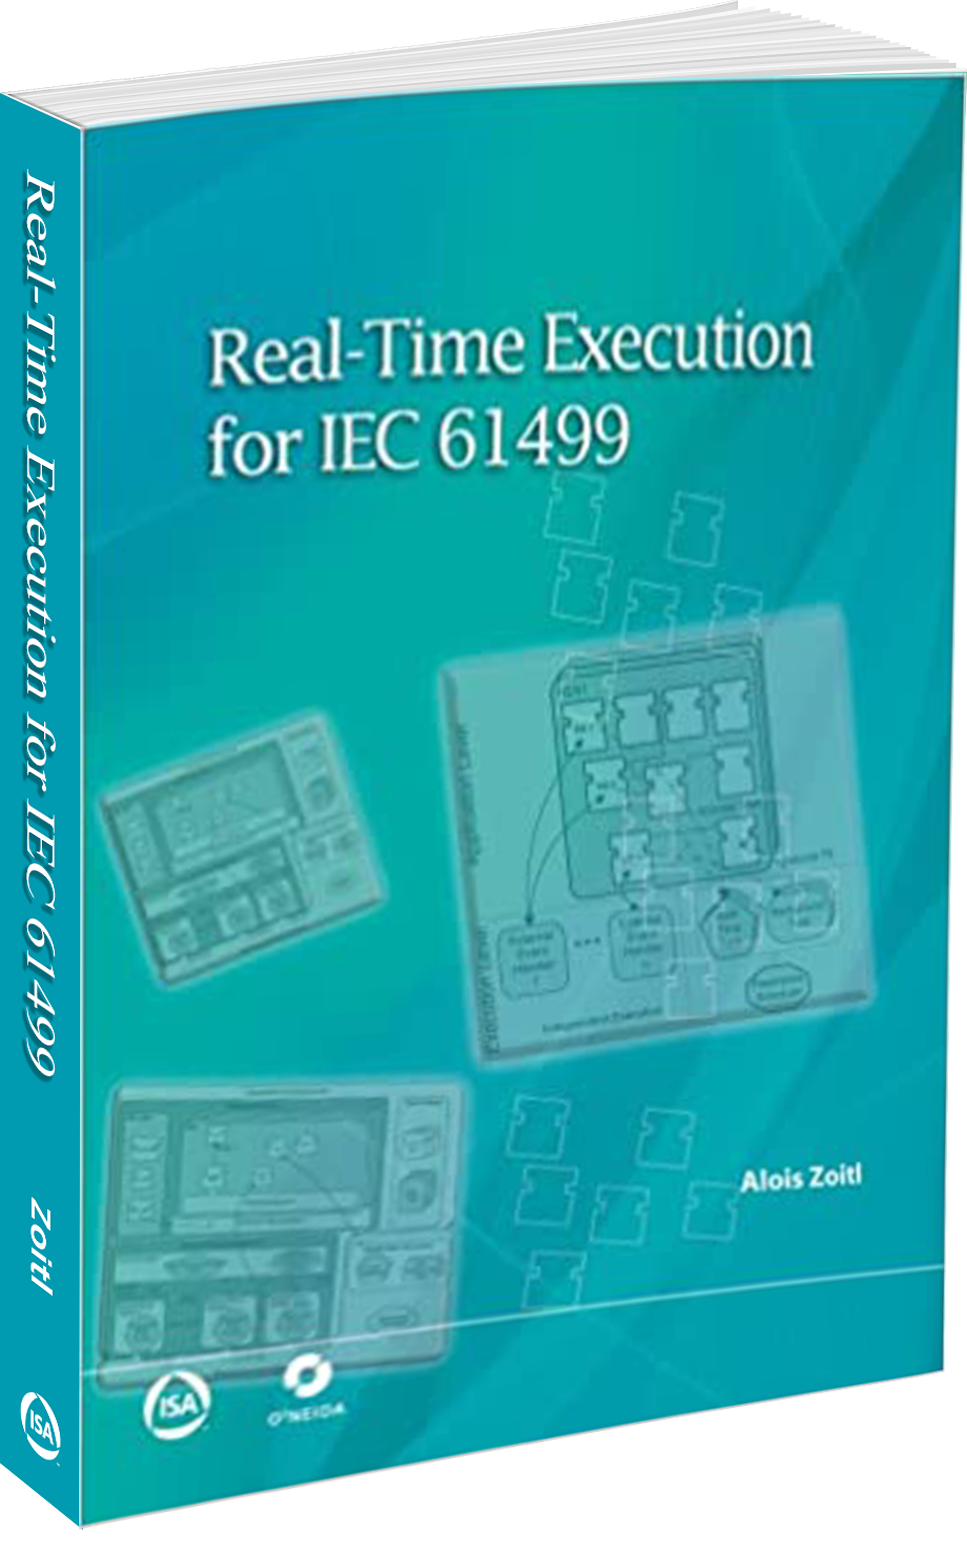 Zoitl-Real-Time-Execution-for-IEC-61499-3D